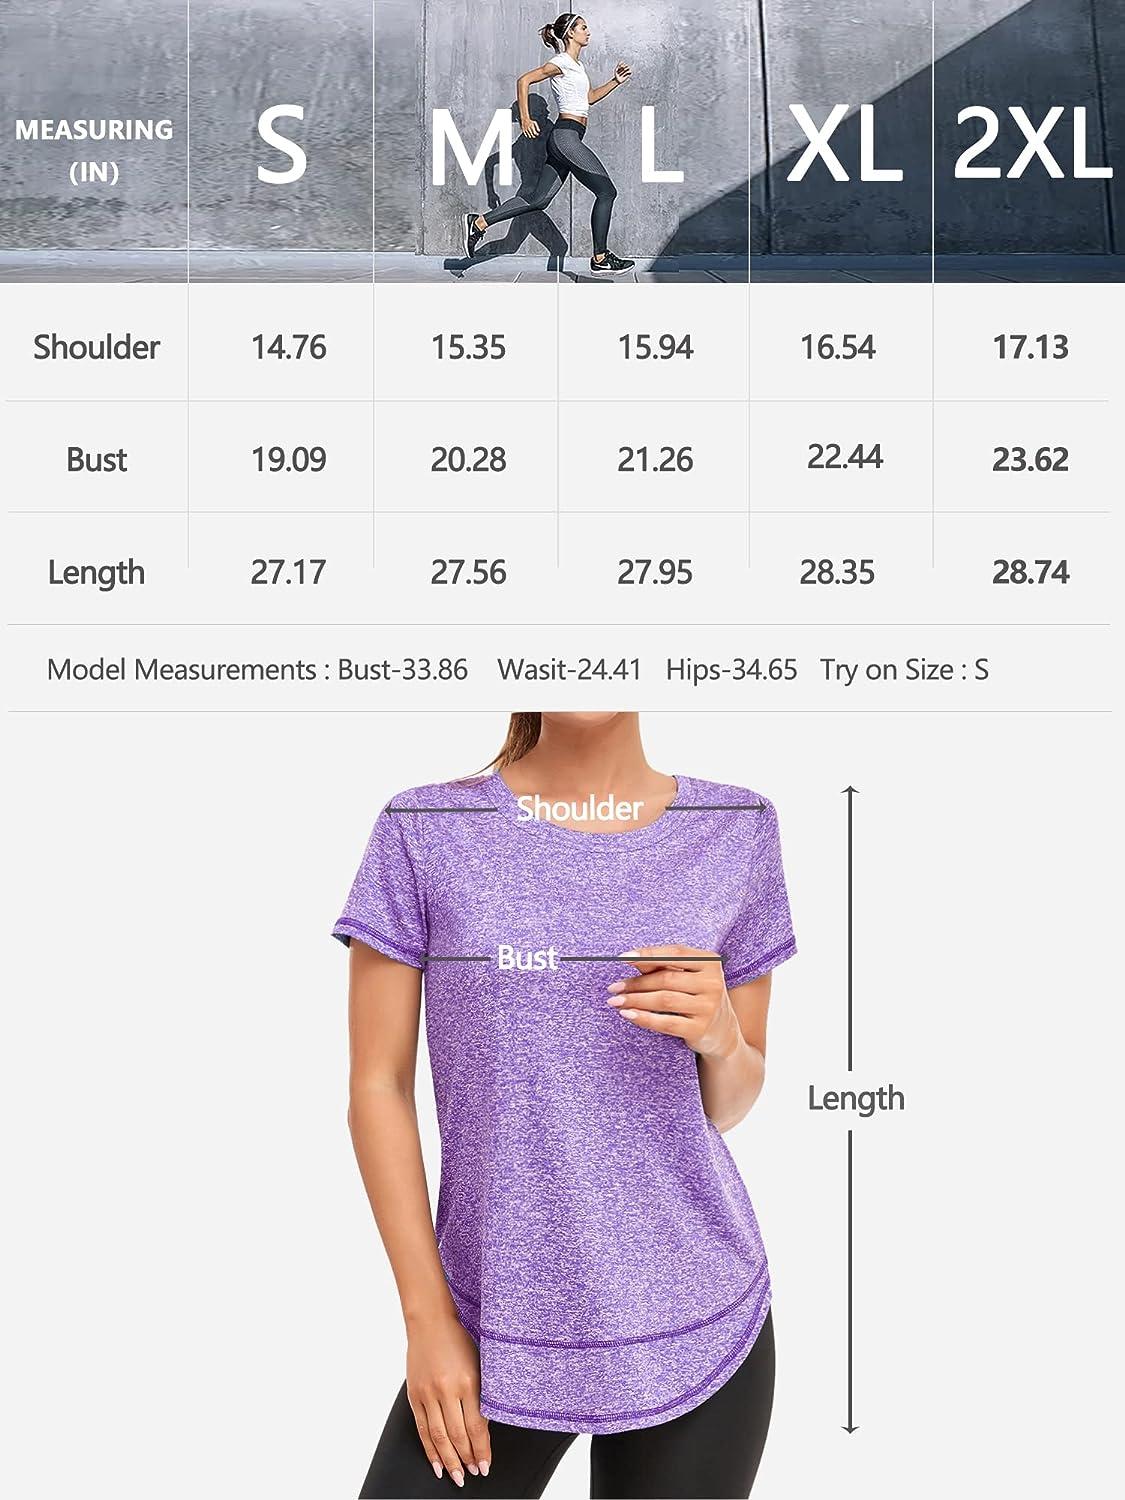 Women's Workout Shirts & Tops in Purple